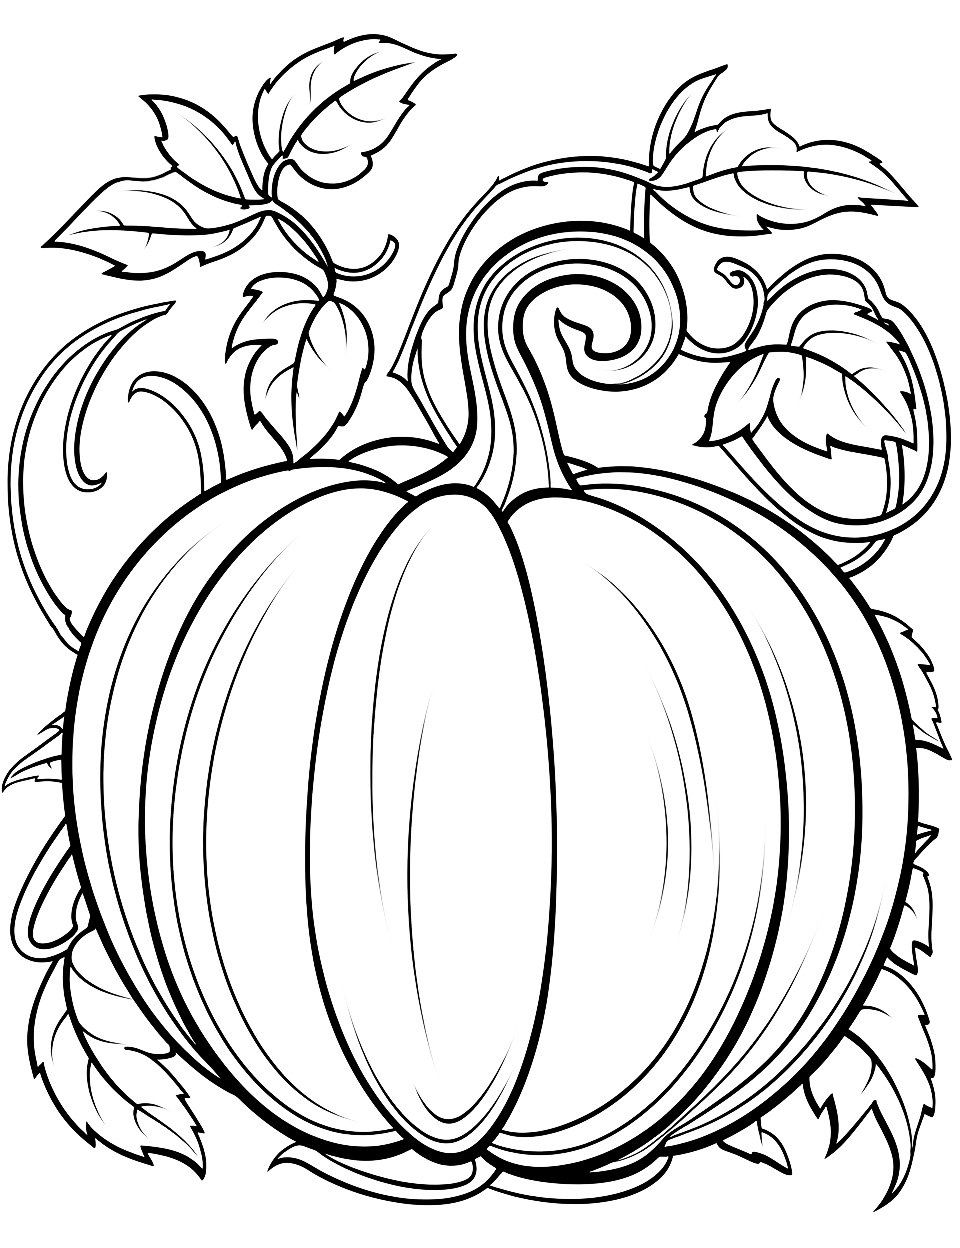 Pumpkin coloring pages for kids free printables pumpkin coloring pages coloring pages fall coloring pages